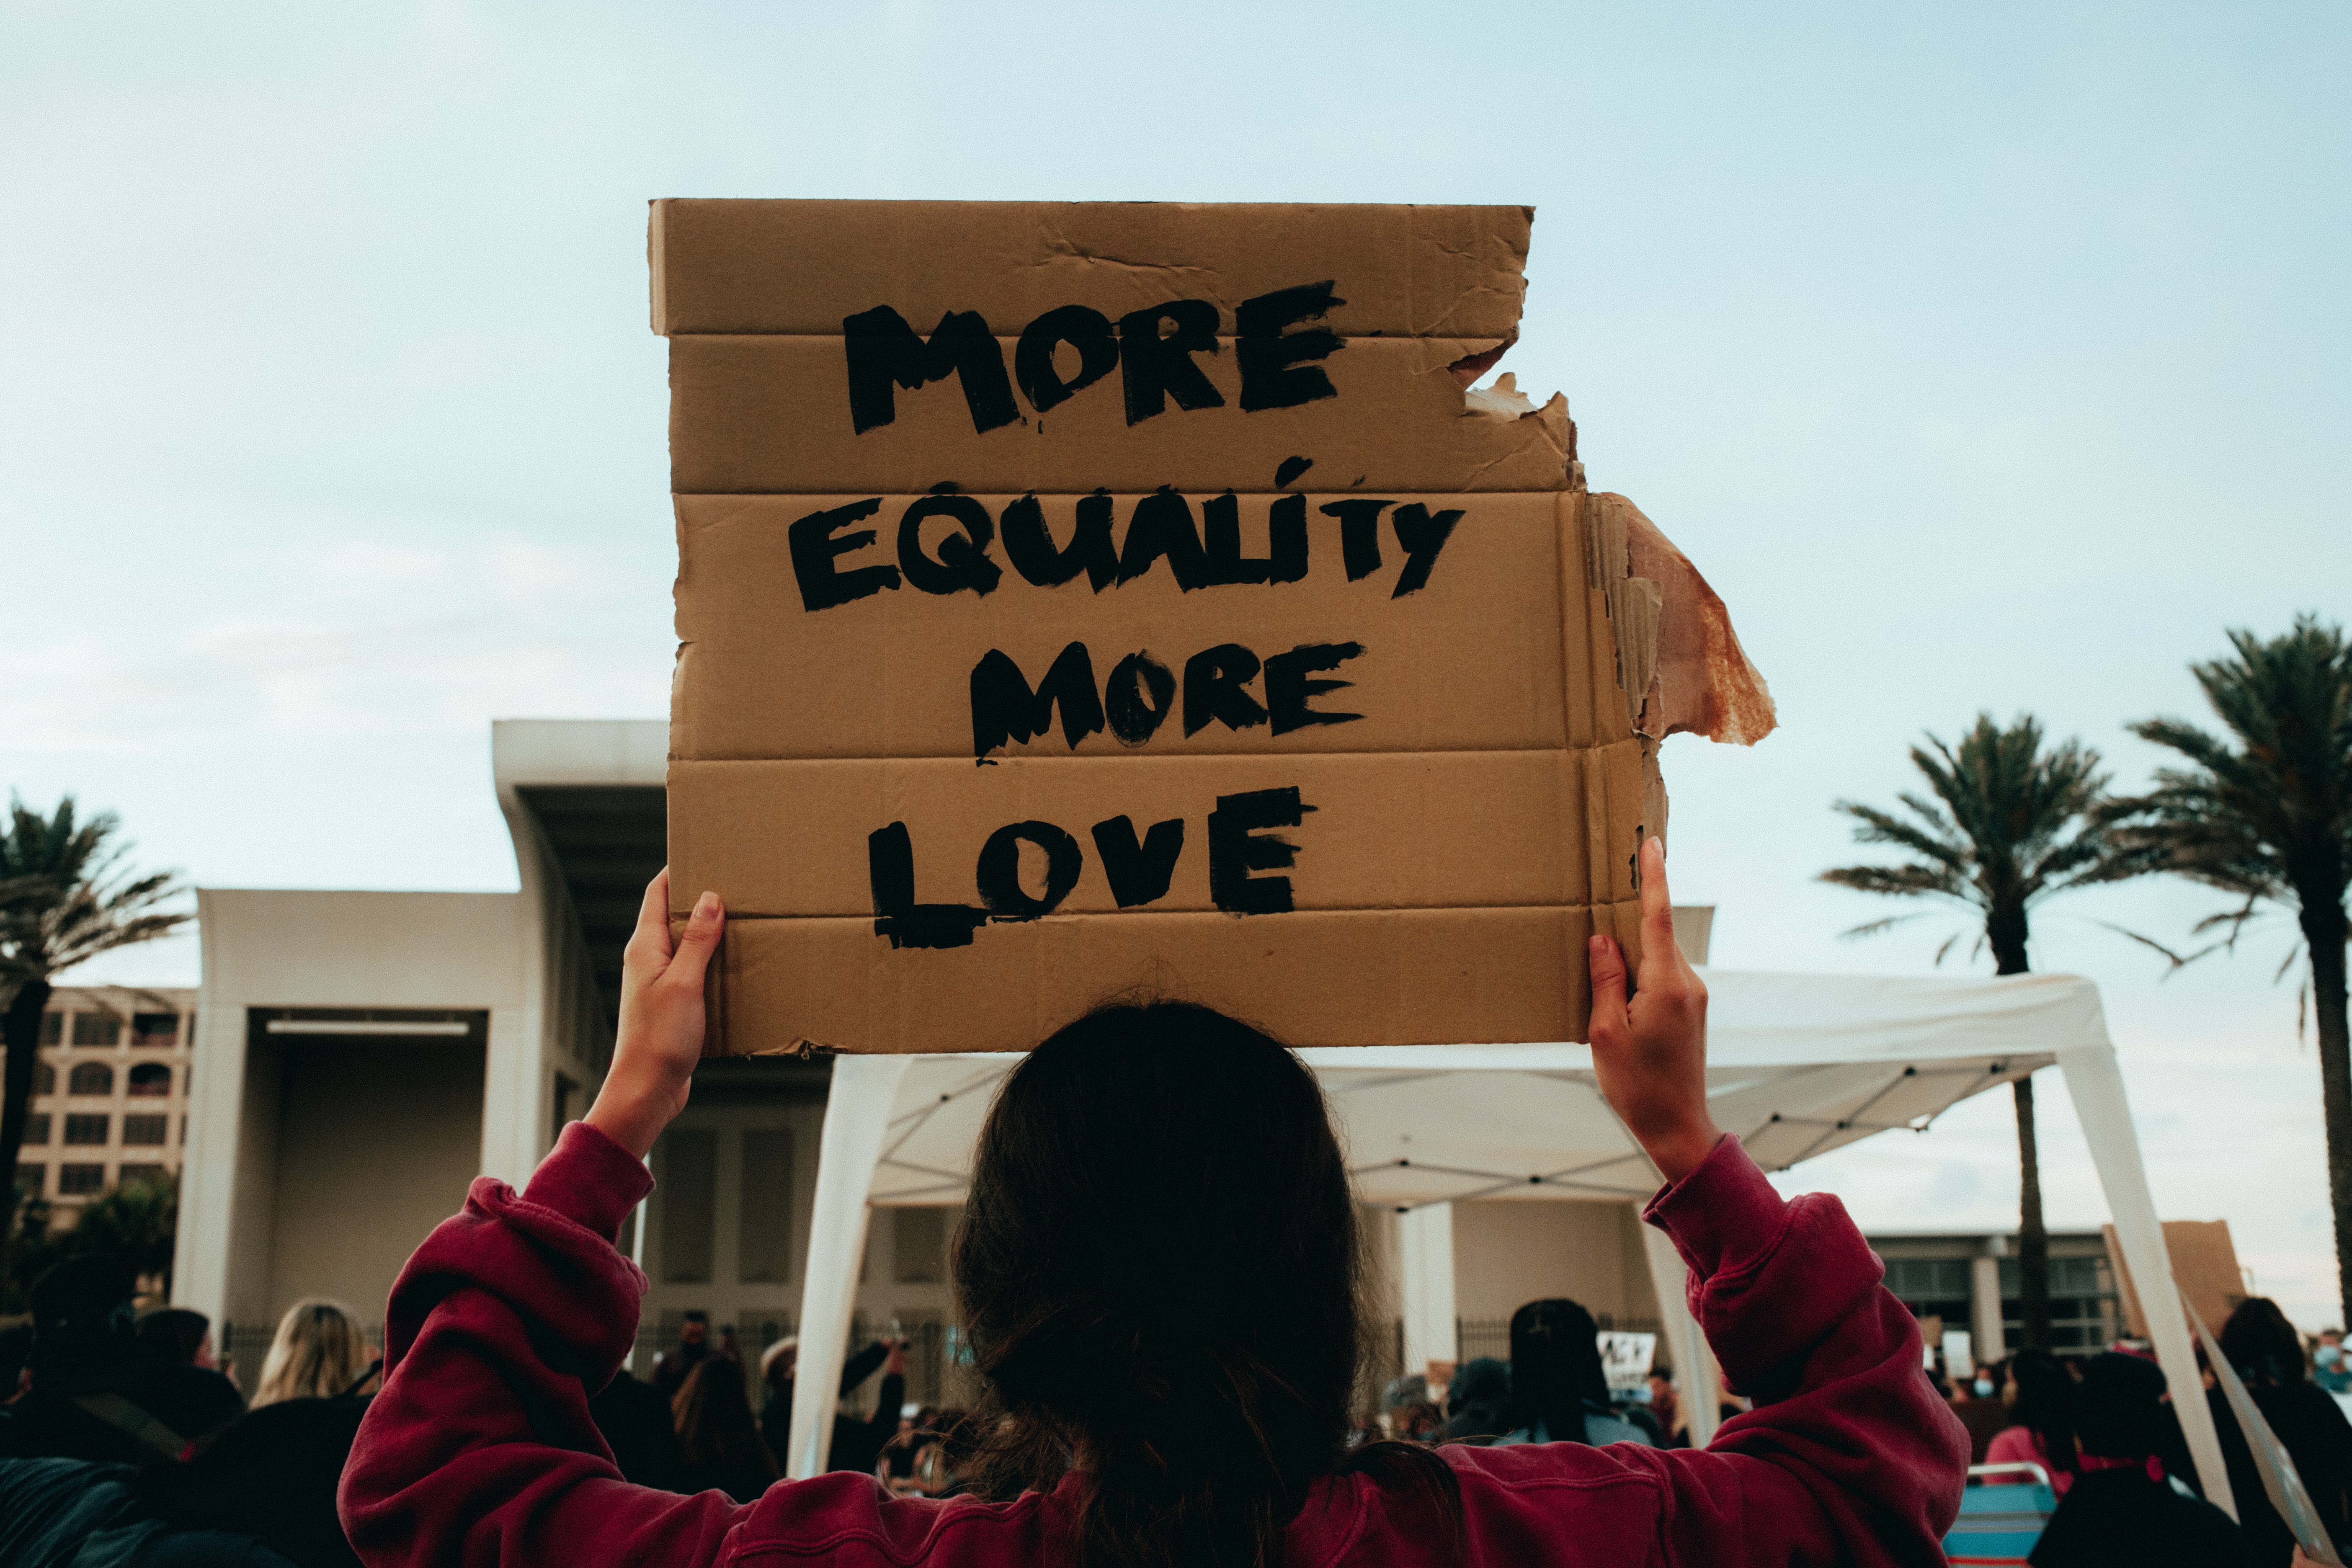 asking for love and equality